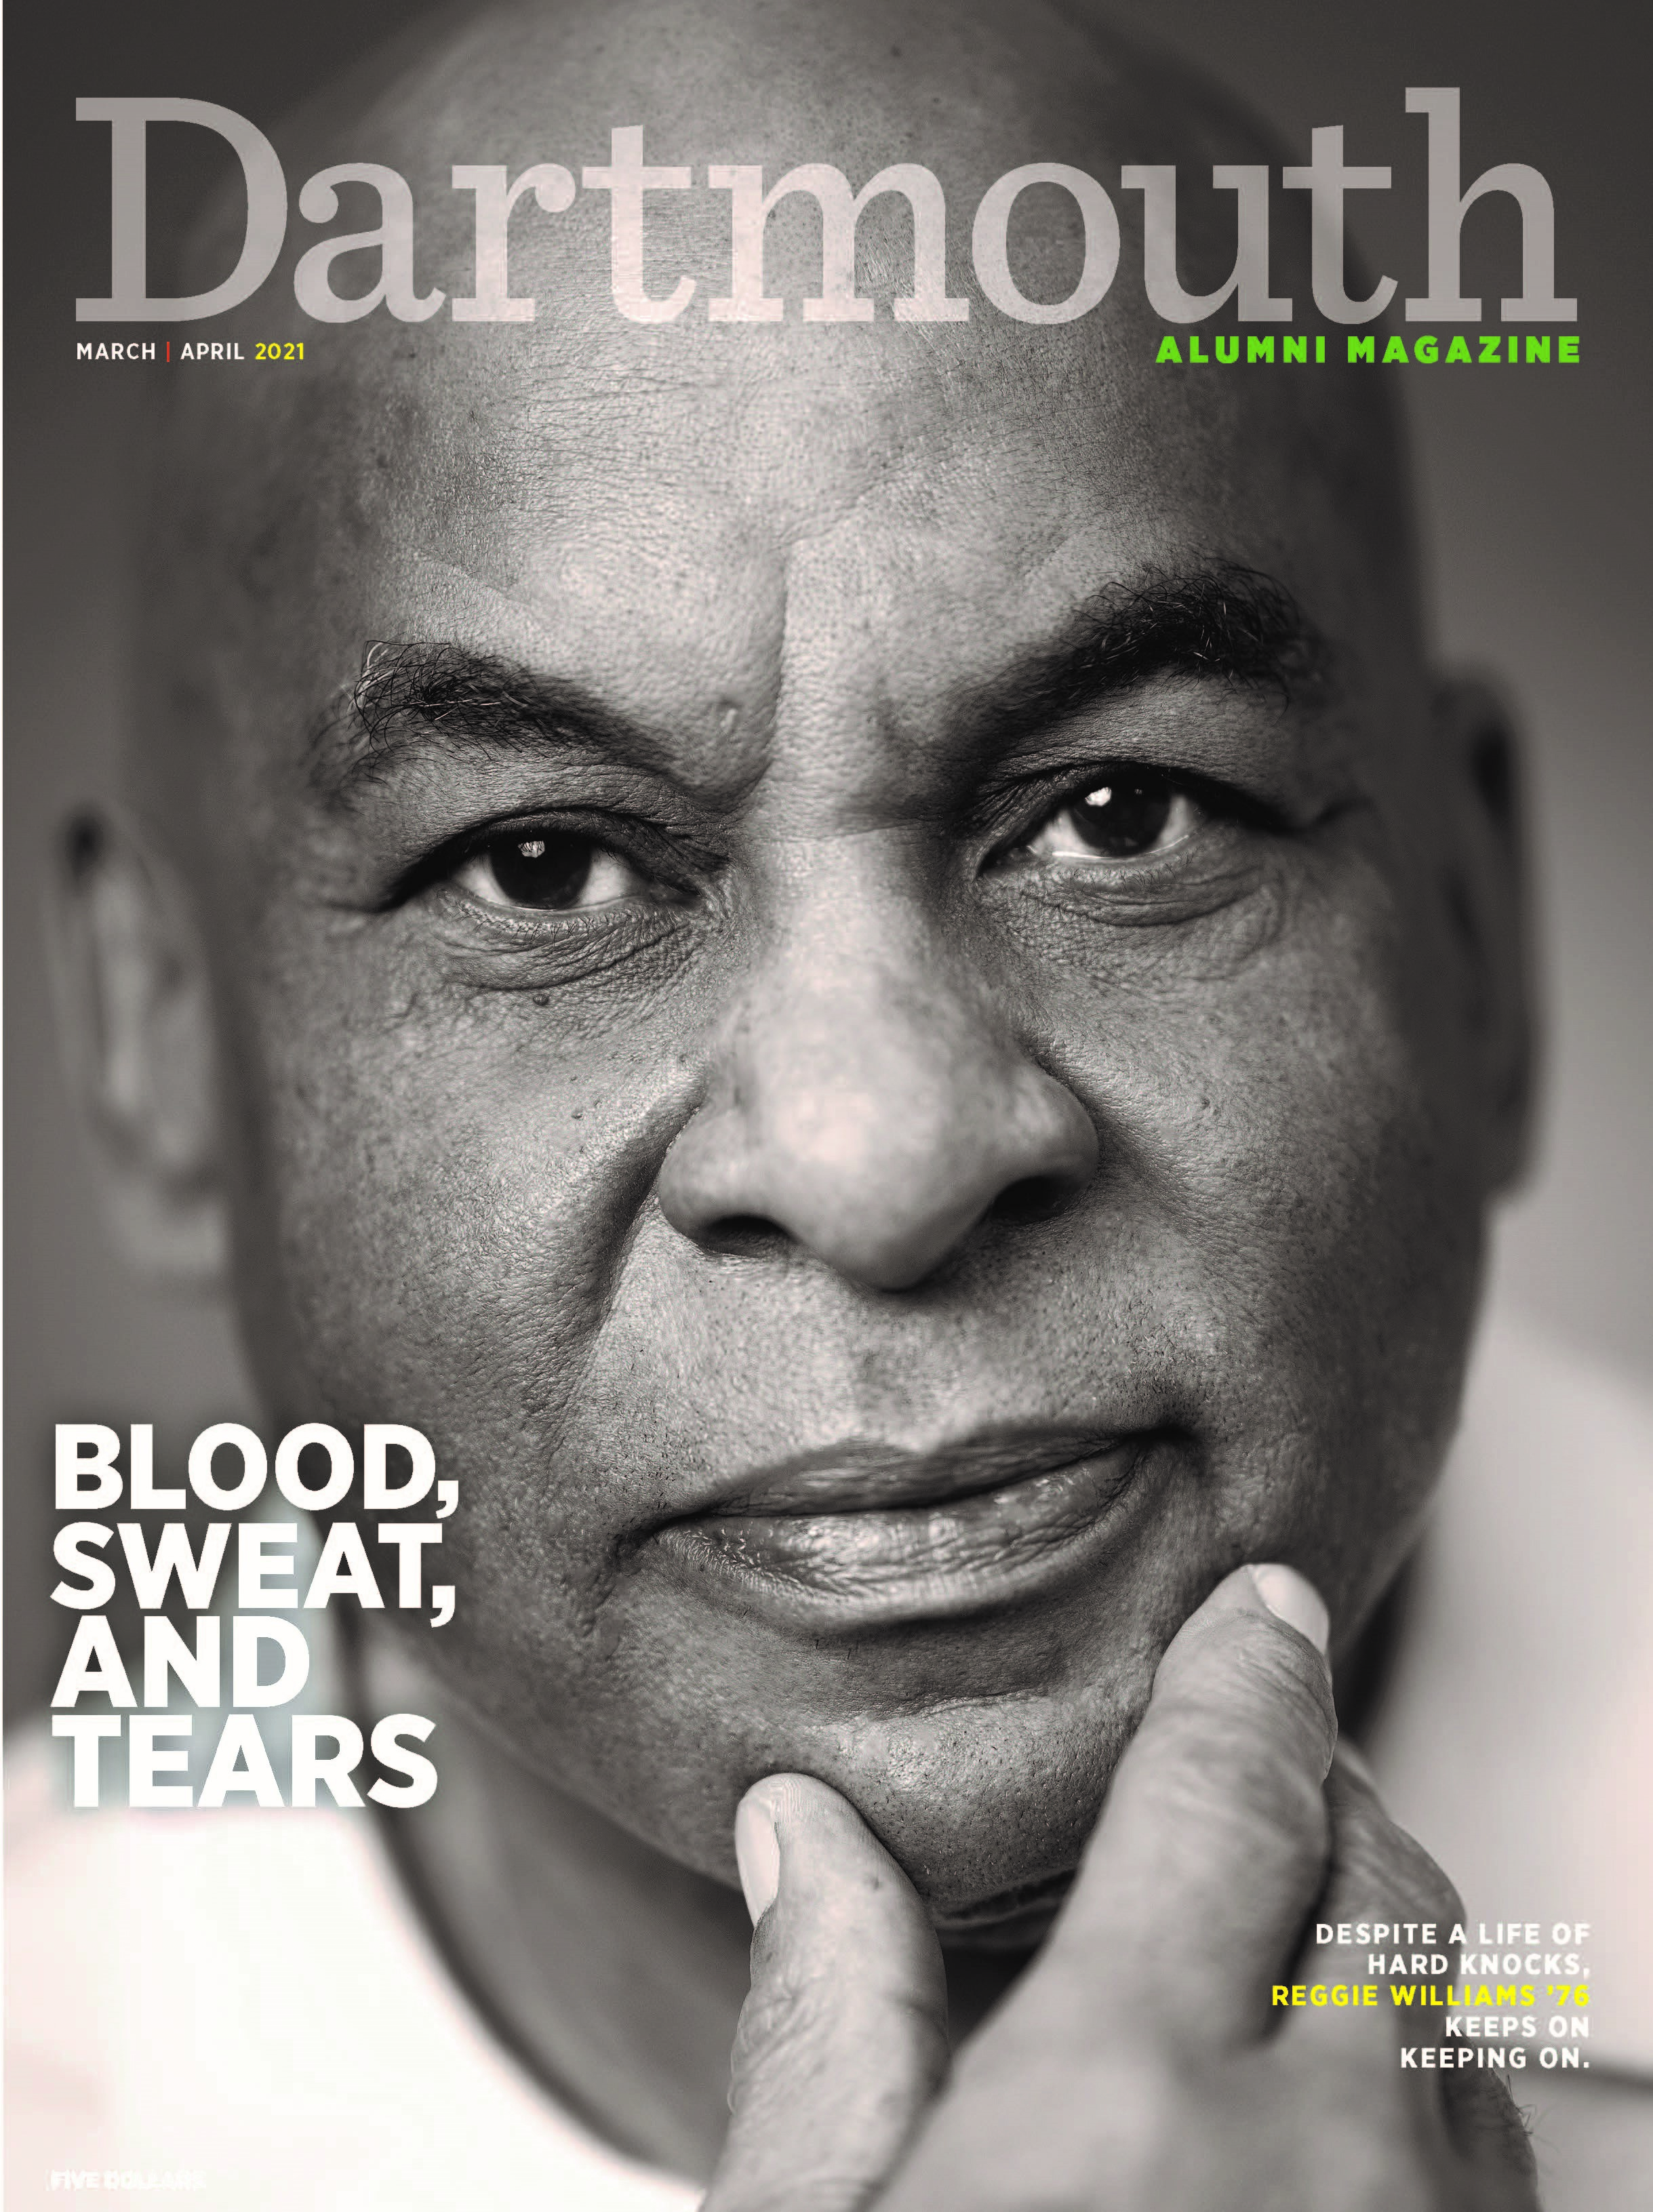 Dartmouth Alumni Magazine - "Blood, Sweat, and Tears," March/April 2021